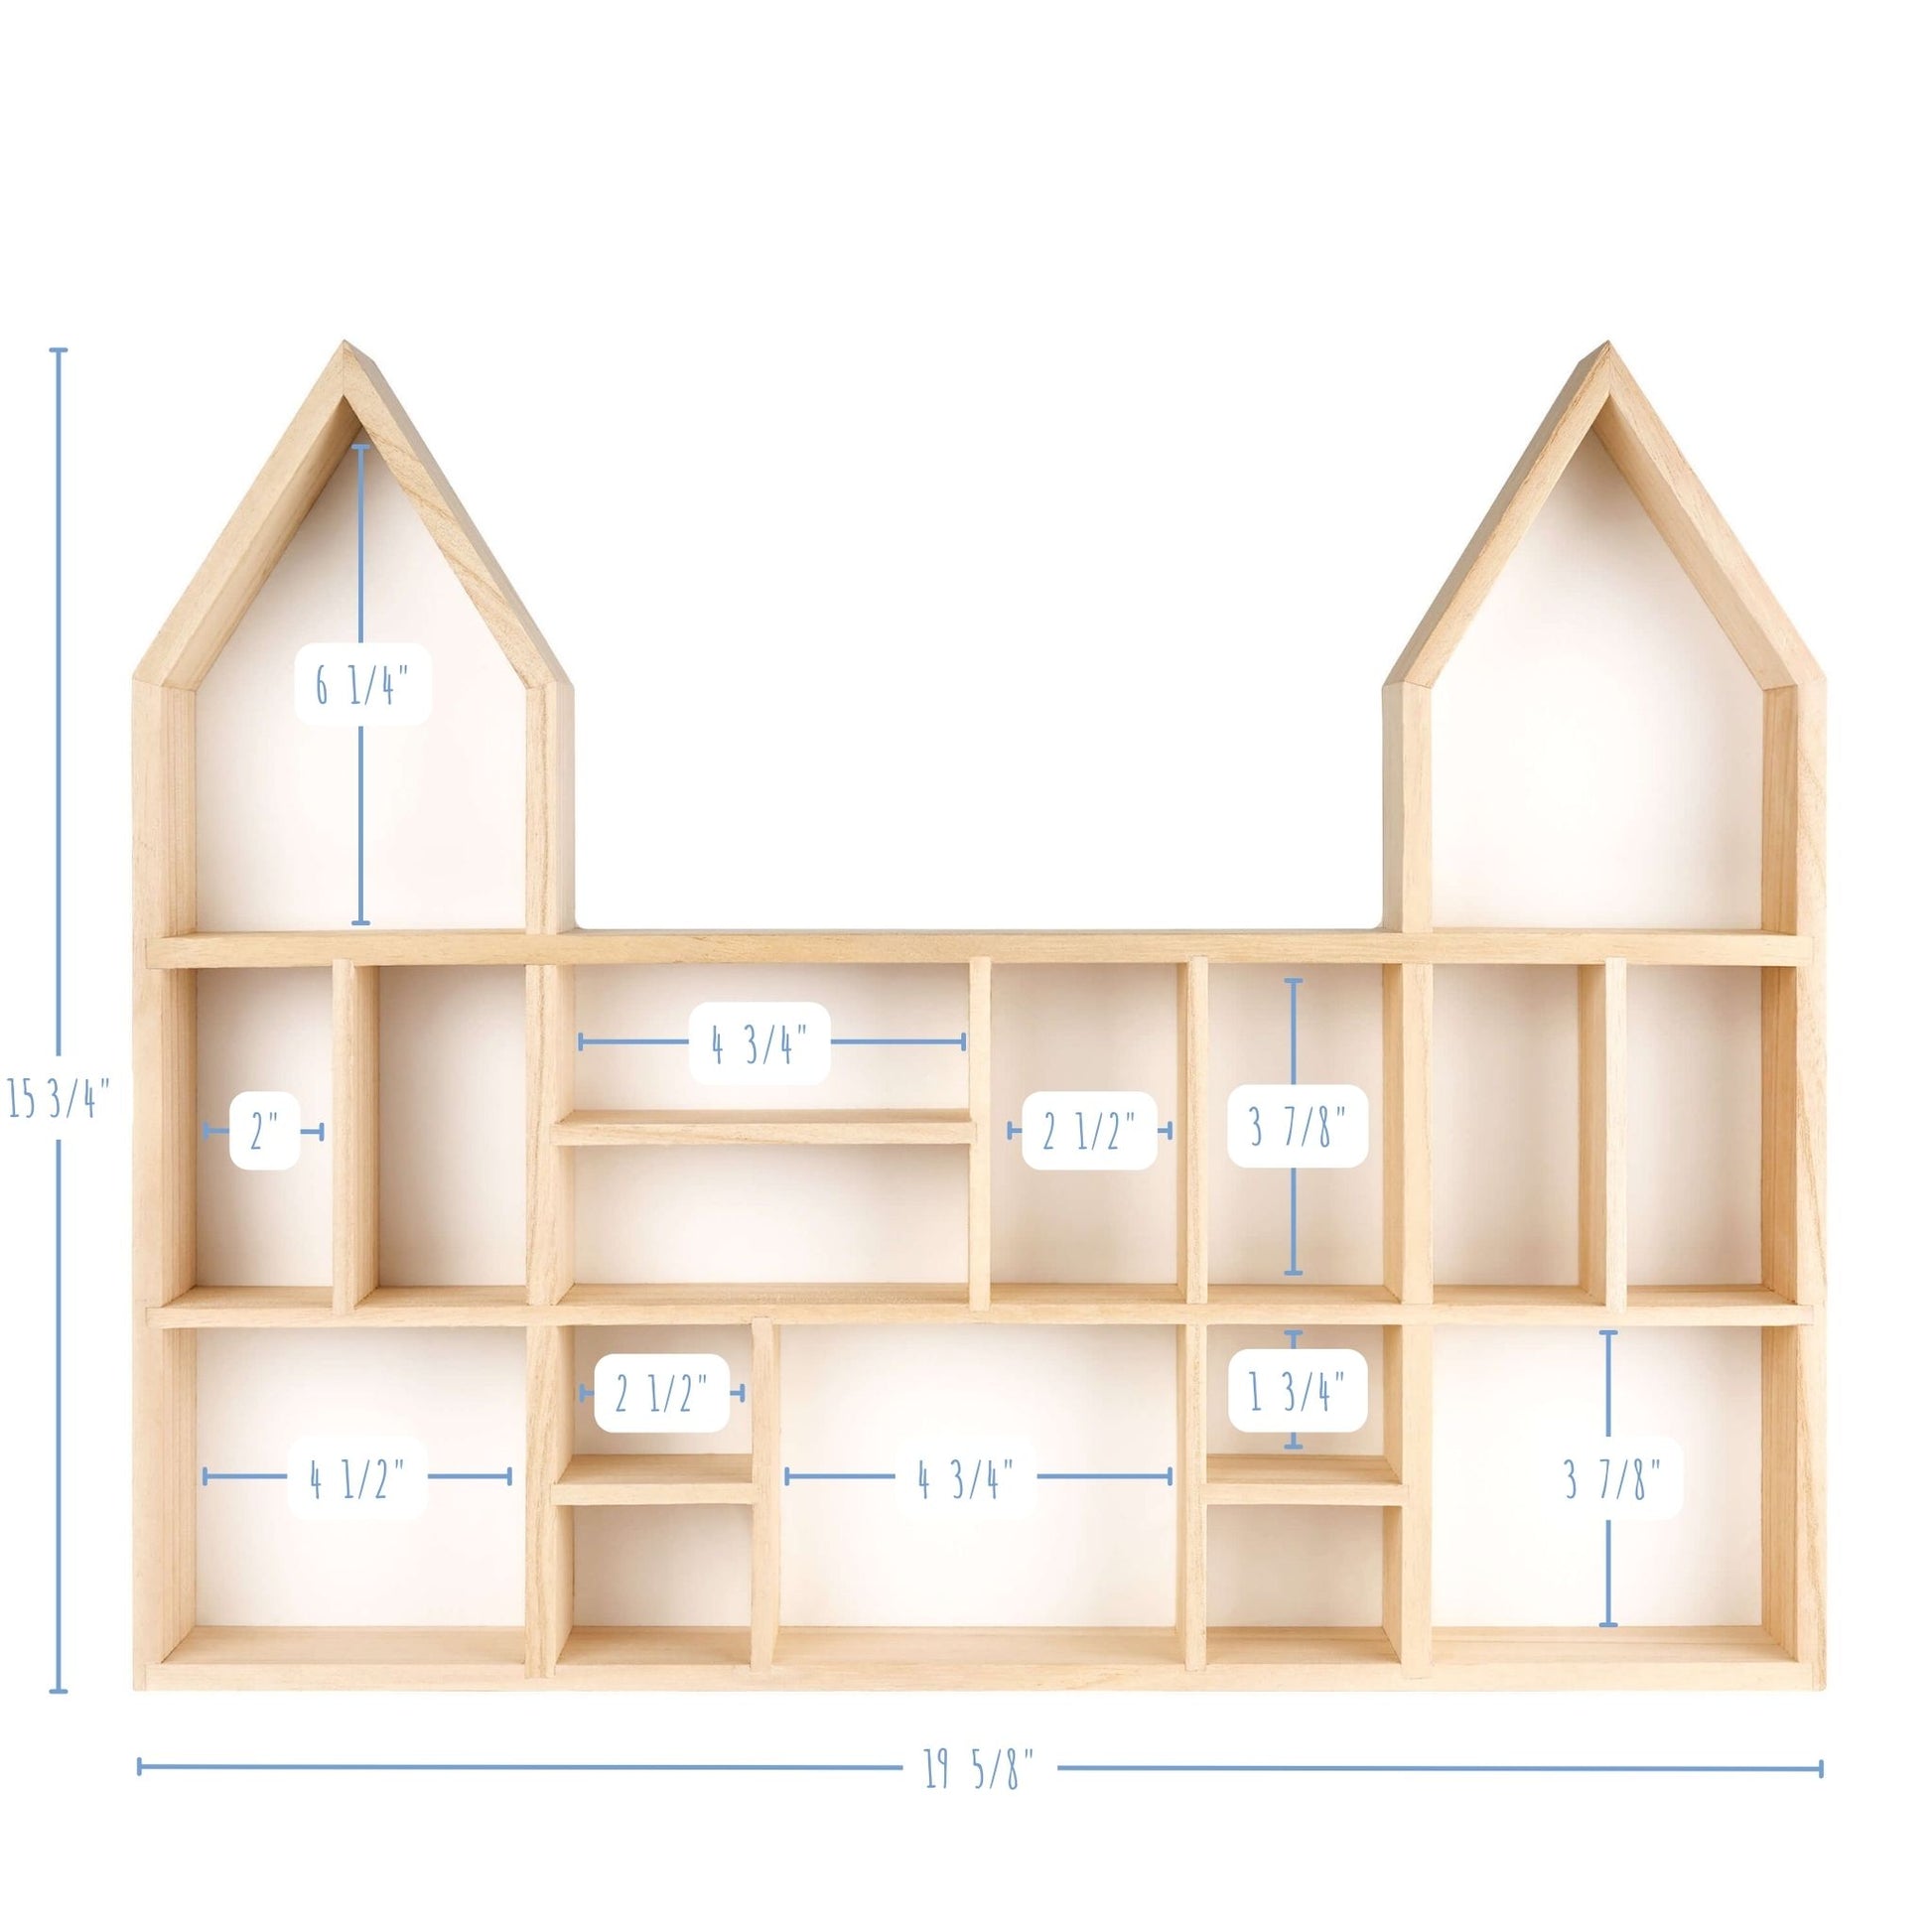 Castle shaped wooden toy display shelf with a white-colored backboard - with compartments size detailed (front view)